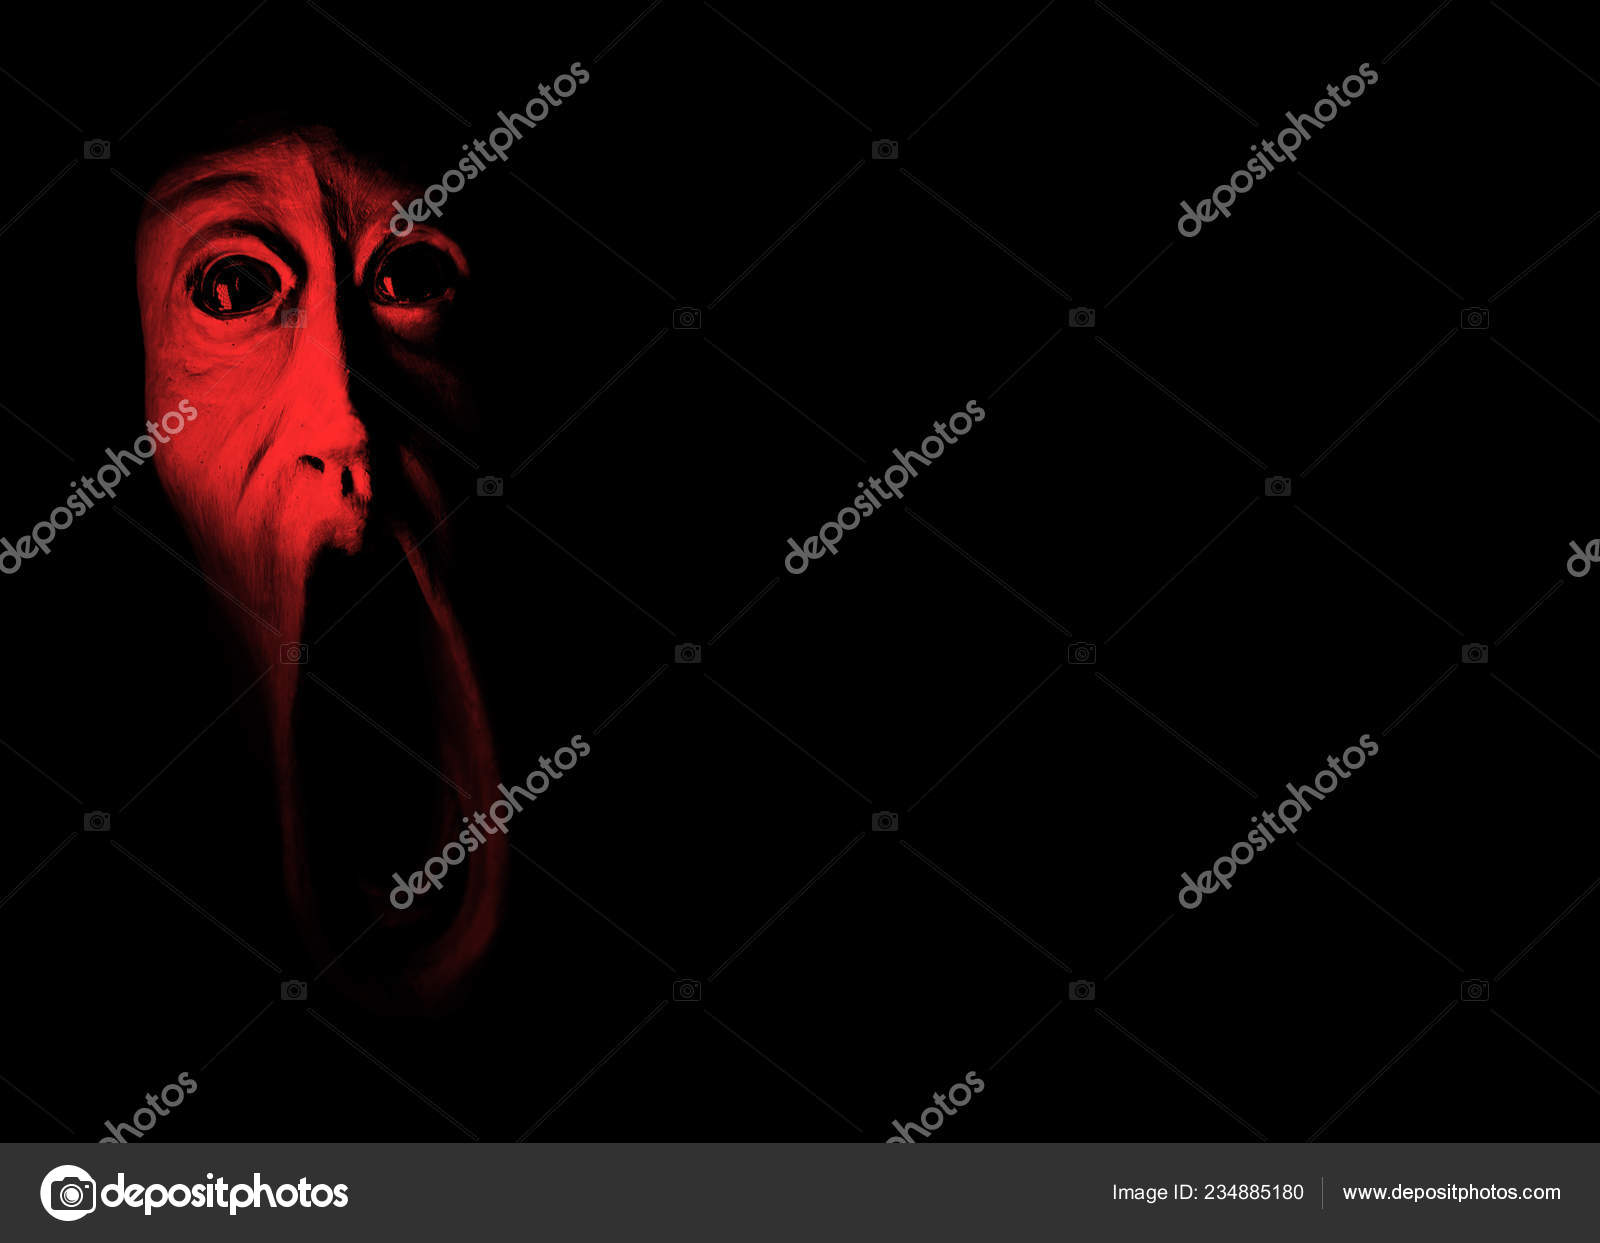 120+ Scared Face Meme Stock Photos, Pictures & Royalty-Free Images